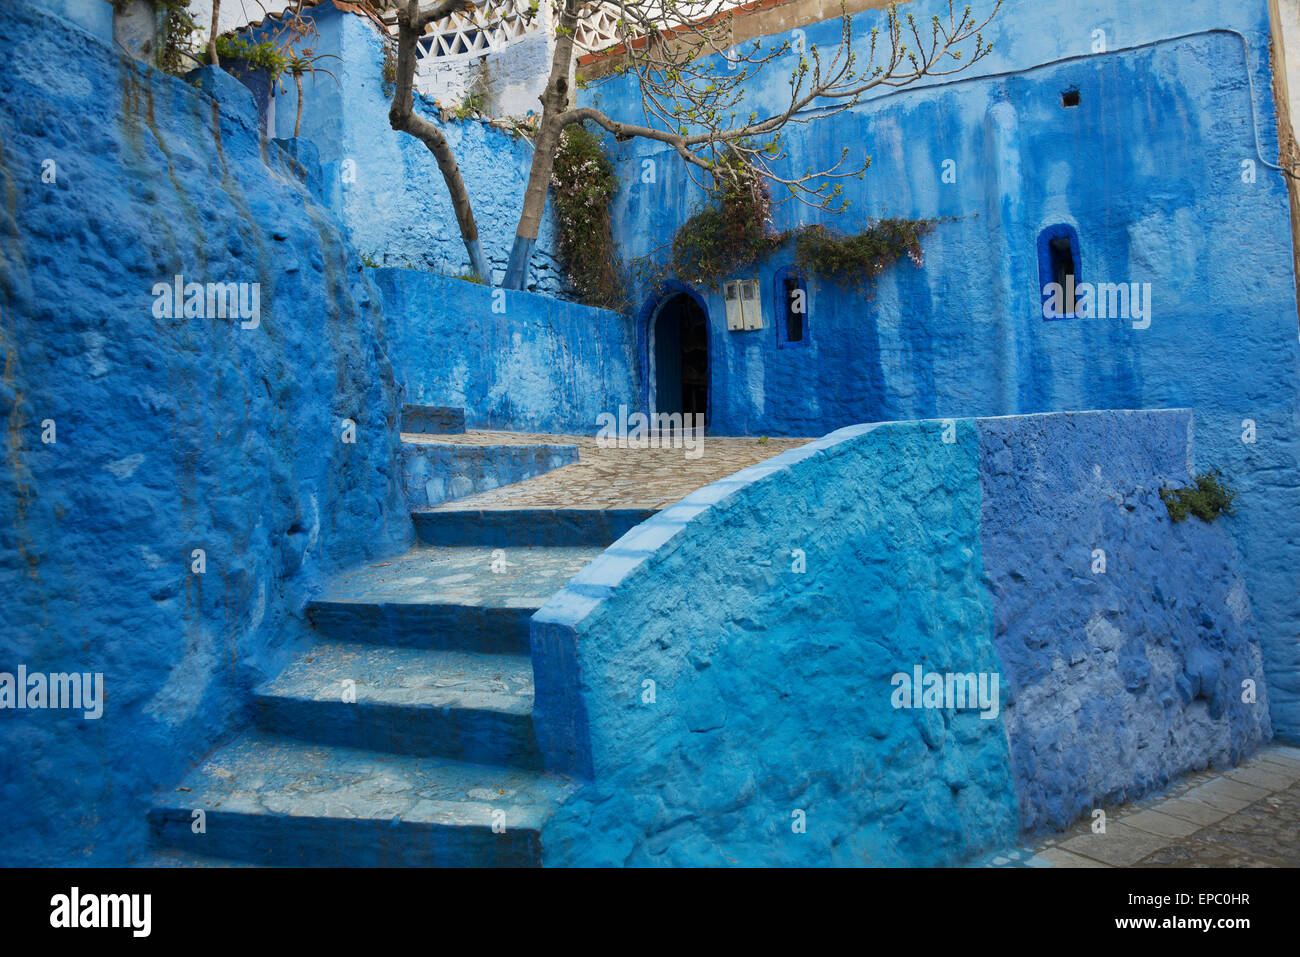 Stairs and buildings painted blue; Chefchaouen, Cornwall, Morocco Stock Photo